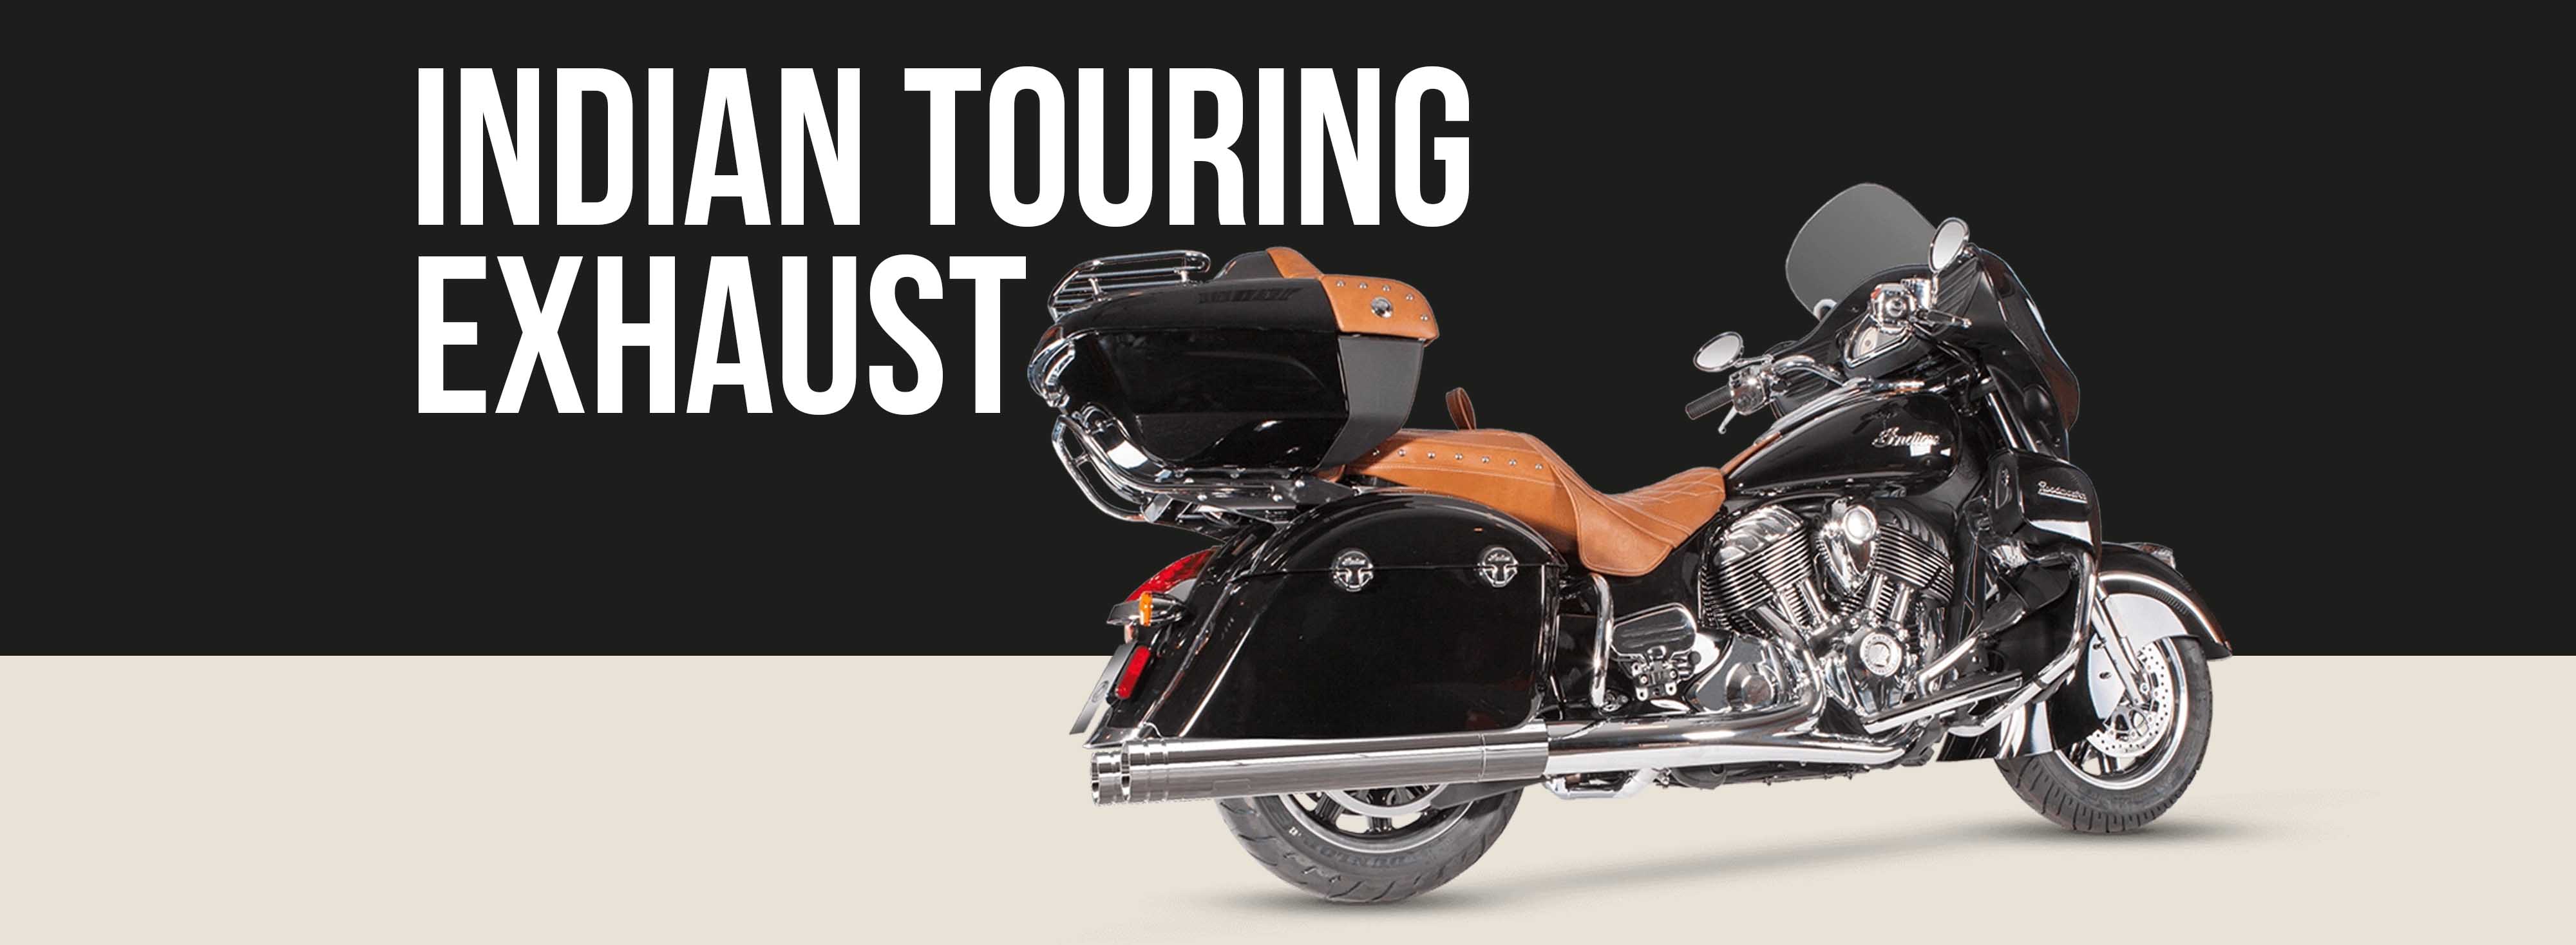 Indian Touring Motorcycle Brand Page Header